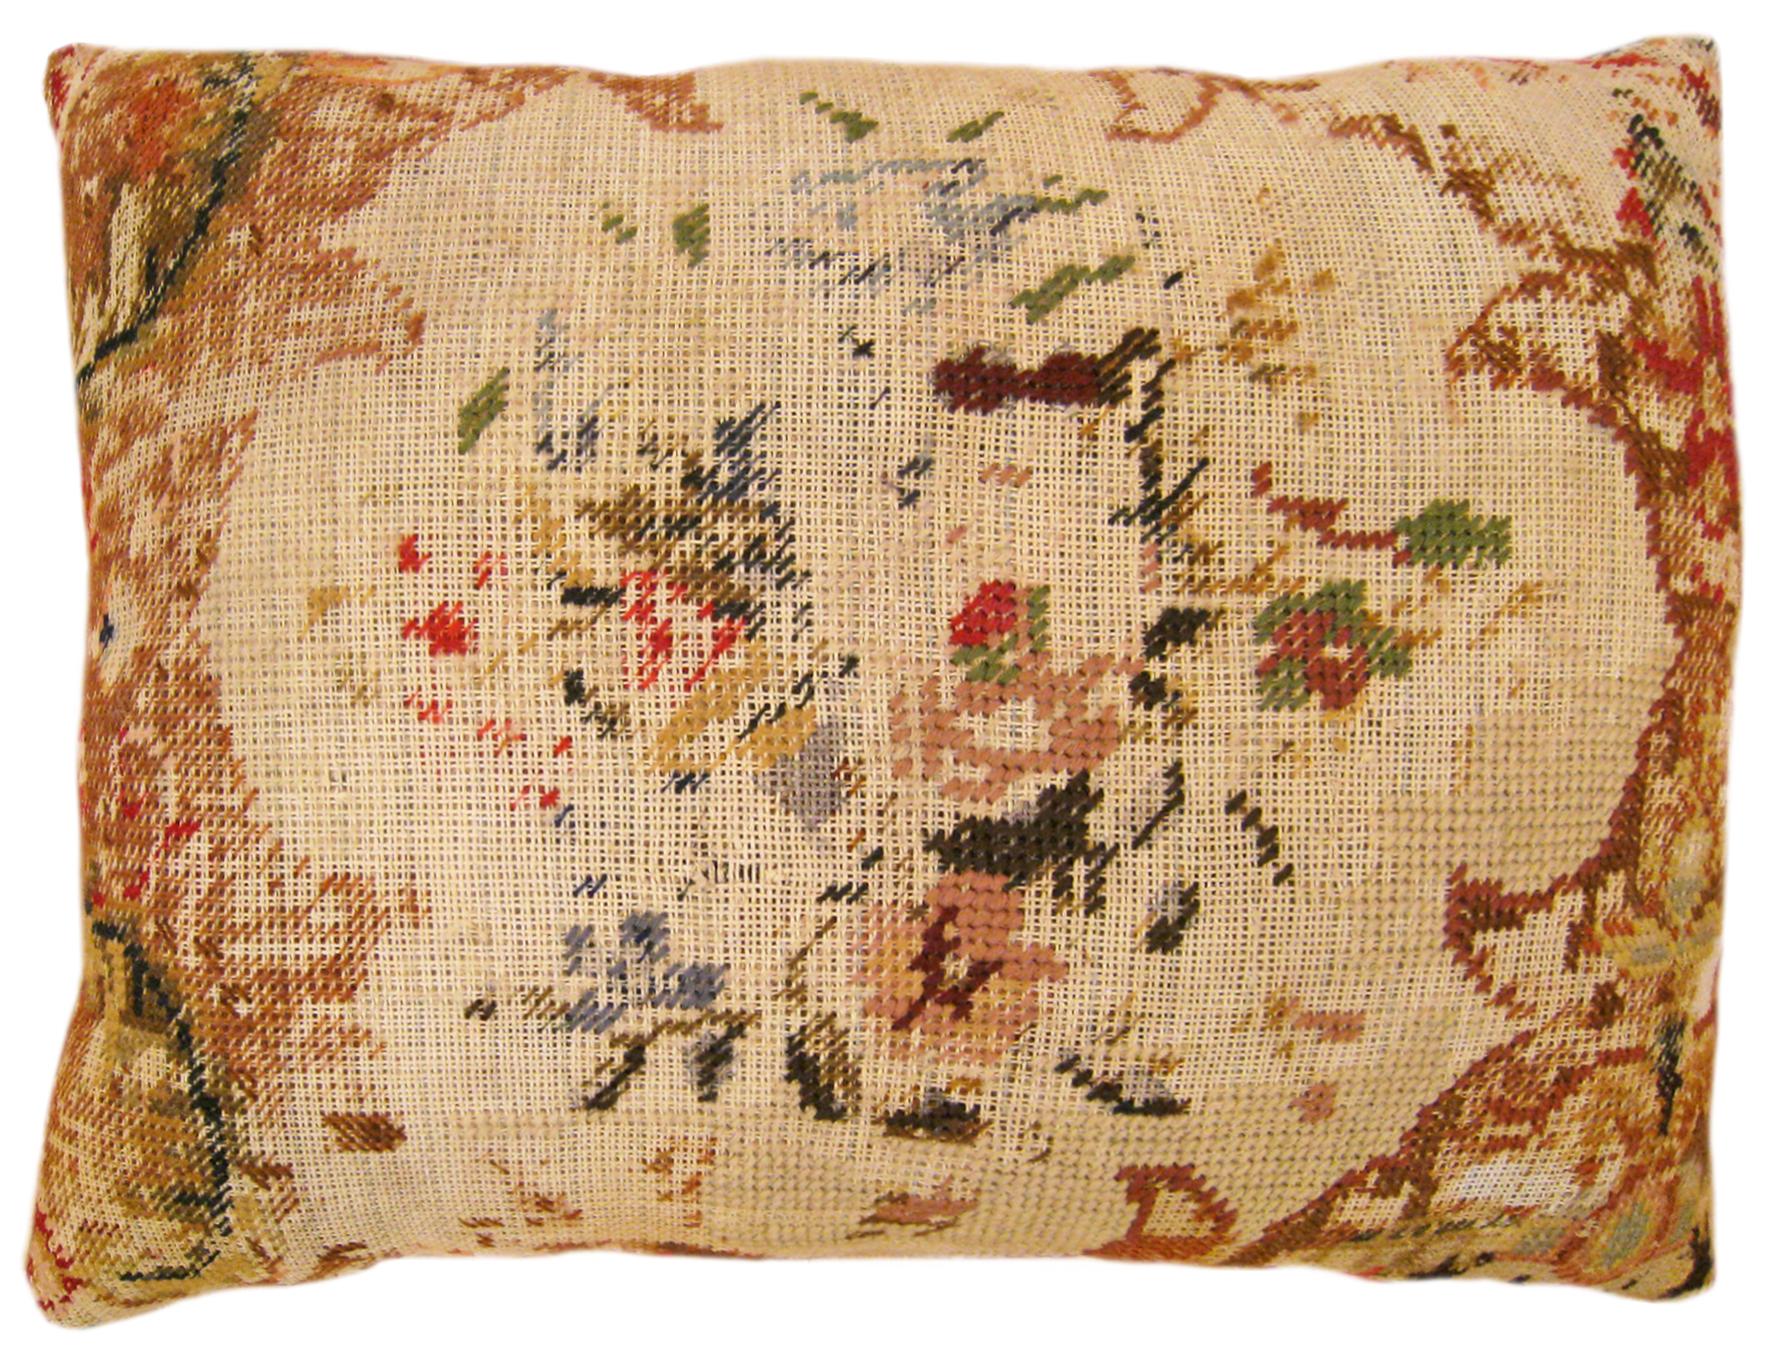 Set of Antique Decorative English Needlepoint Rug Pillows with Floral For Sale 8